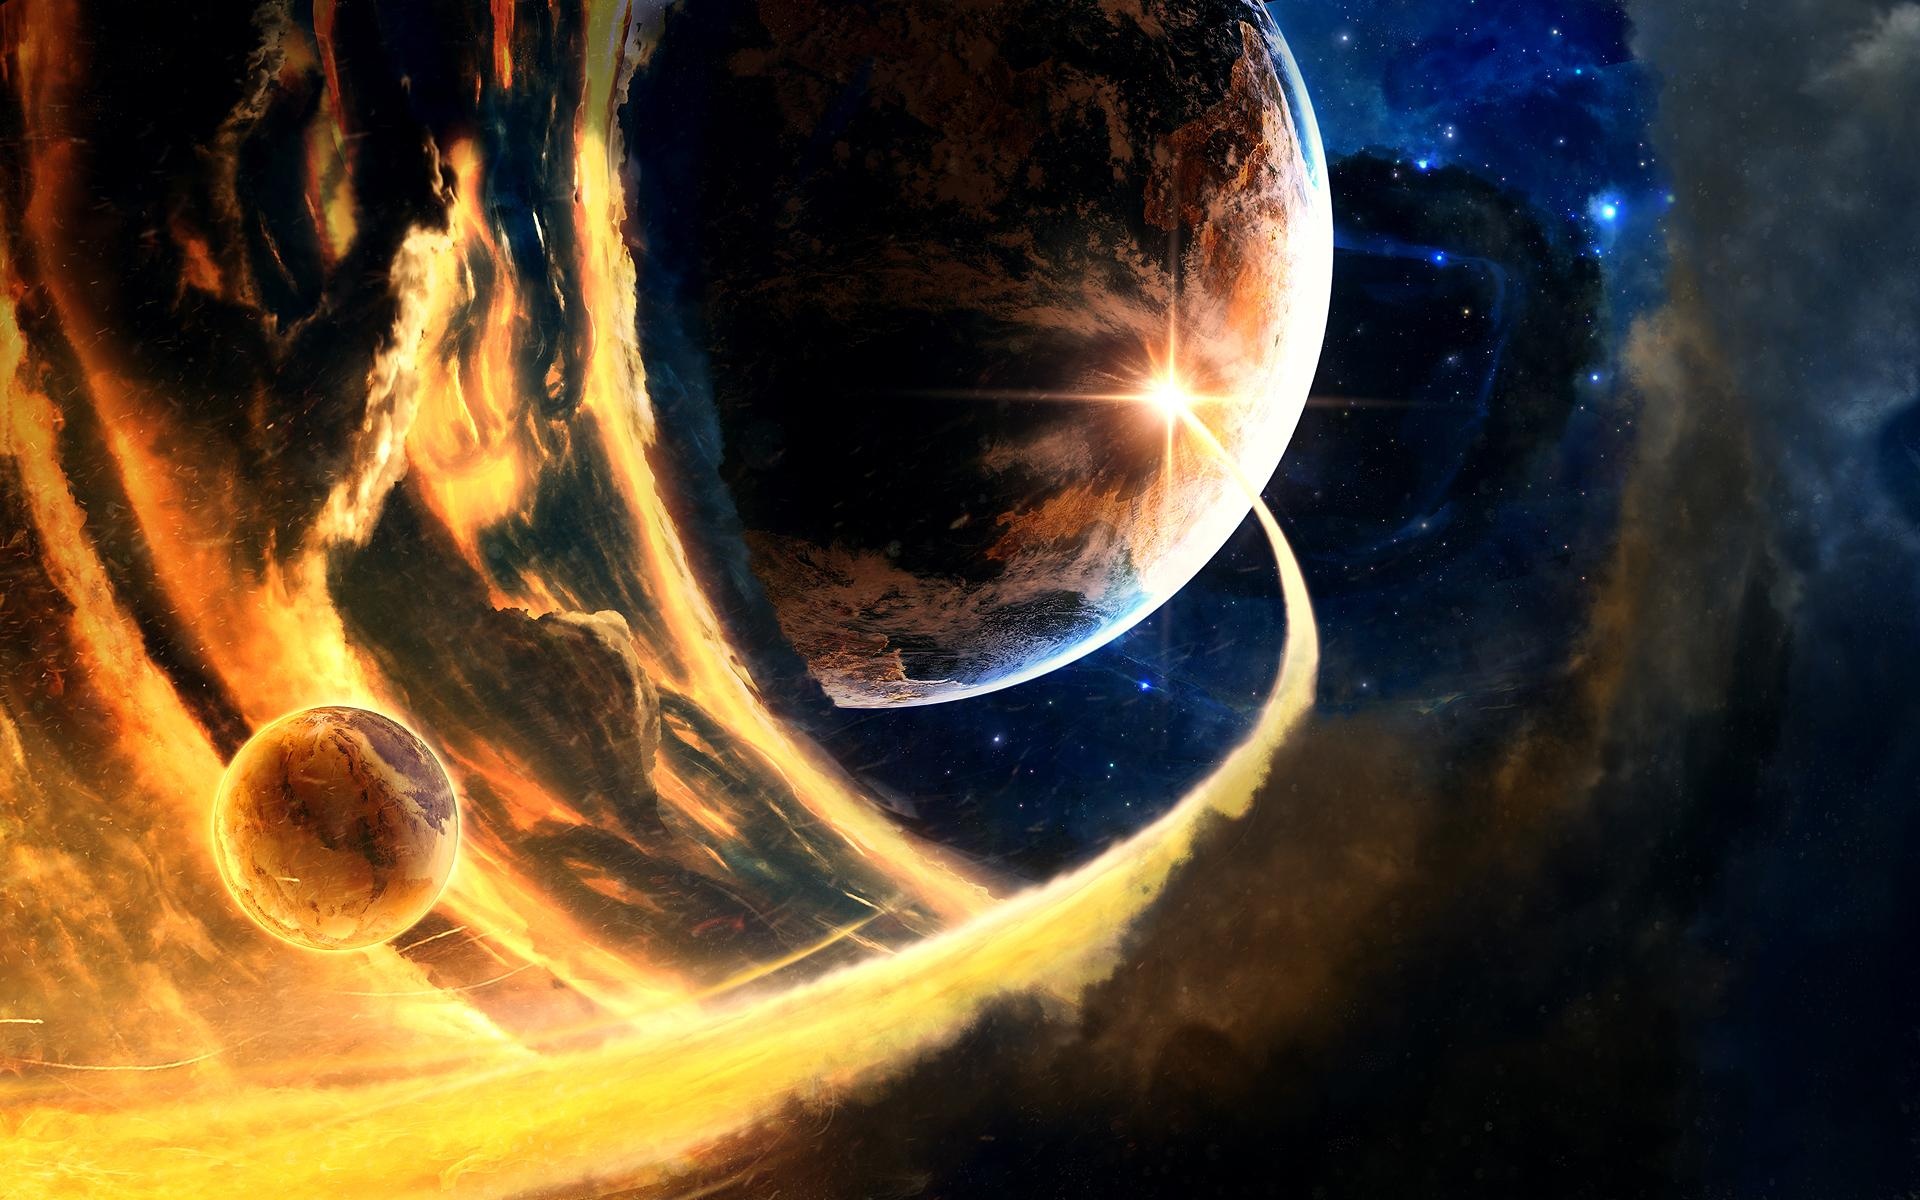 sci, Fi, Science, Fiction, Cg, Digital, Art, Paintings, Airbrushing, Comet, Asteroid, Planets, Fire, Flames, Stars, Space, Nebula, Apocalyptic, Apoc, Destruction, Devastation, Color, Bright Wallpaper